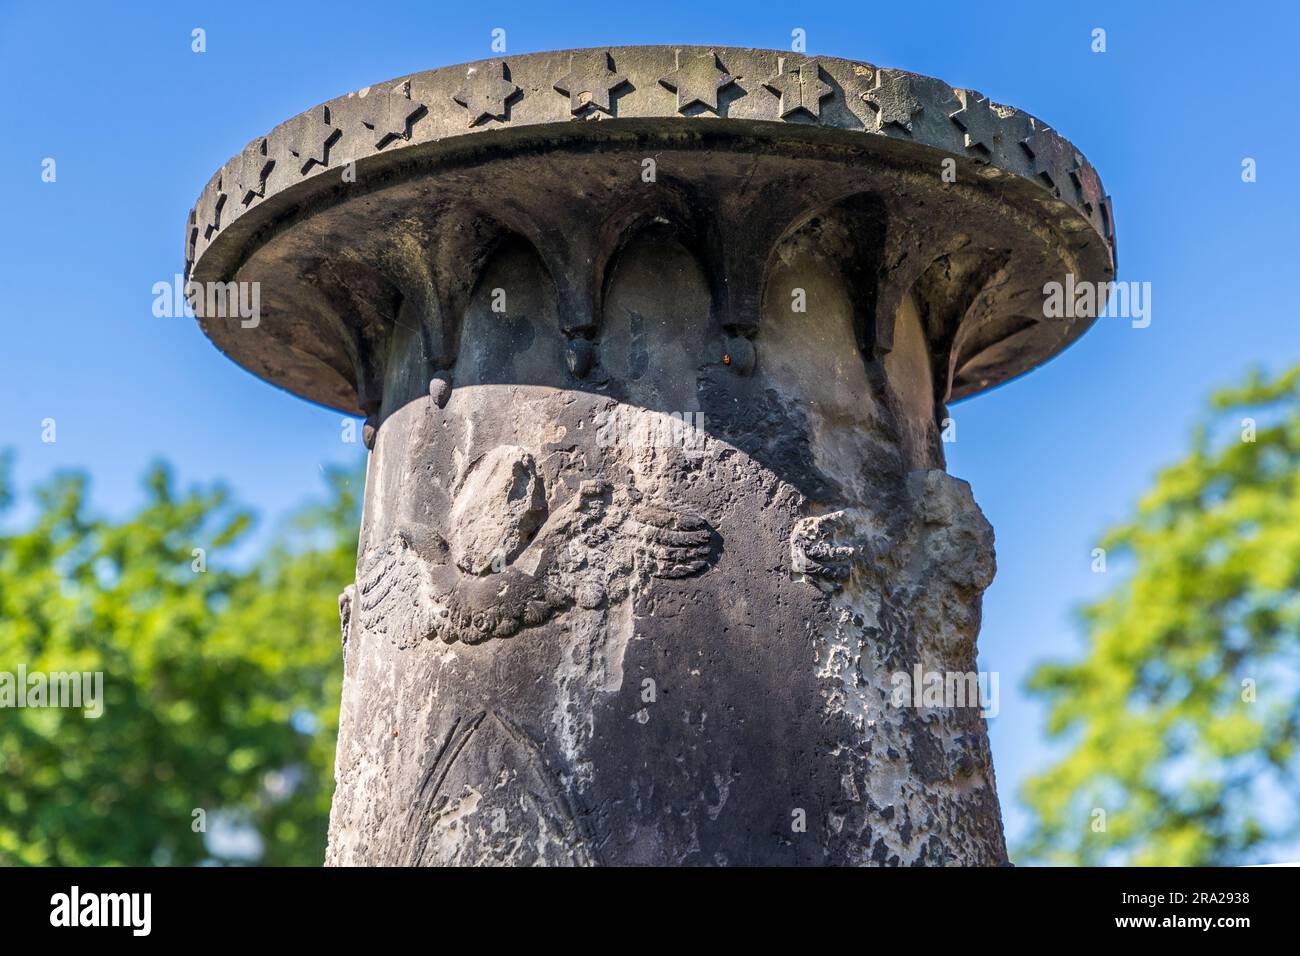 Detail of a grave column after a design by Capsar David Friedrich at the Elias cemetery in Dresden. Gravestones in a great variety of forms tell of 200 years of history of the residential city of Dresden. The Elias Cemetery in Dresden, Germany, has been disused since 1876 and closed since 1924 Stock Photo